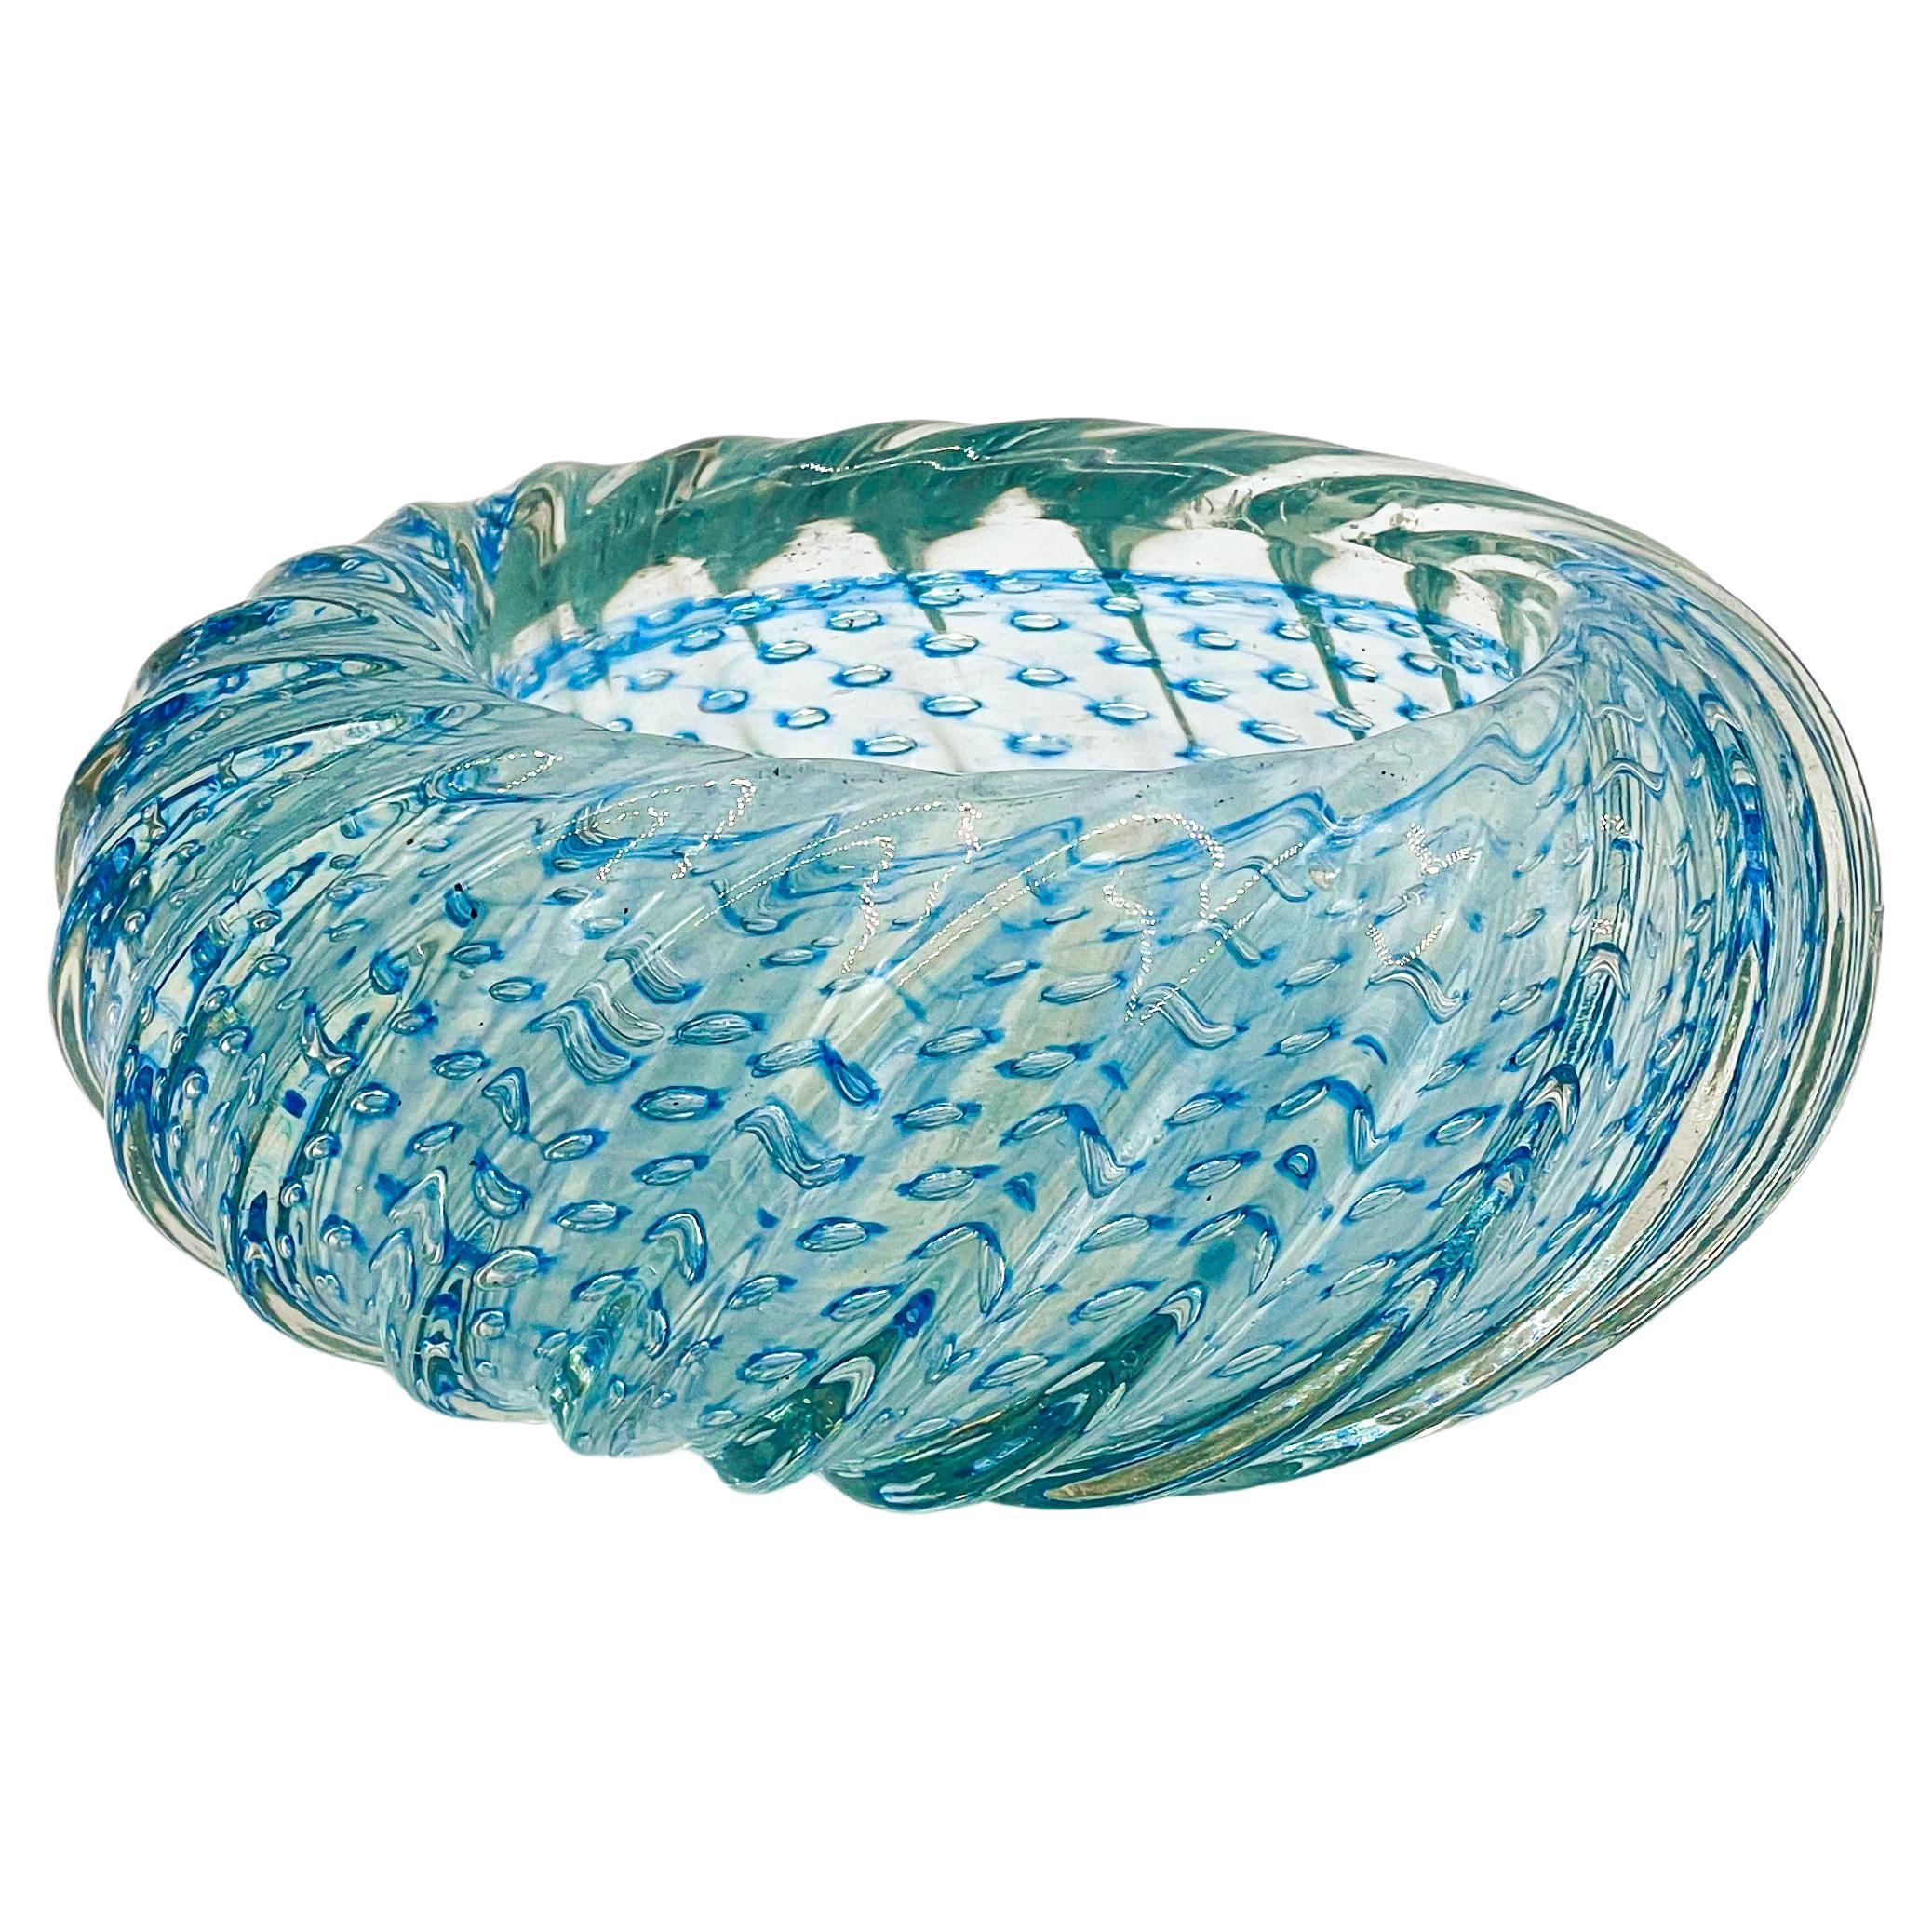 Coffee Table Accent, Murano Glass Bowl by Barovier, Blue For Sale